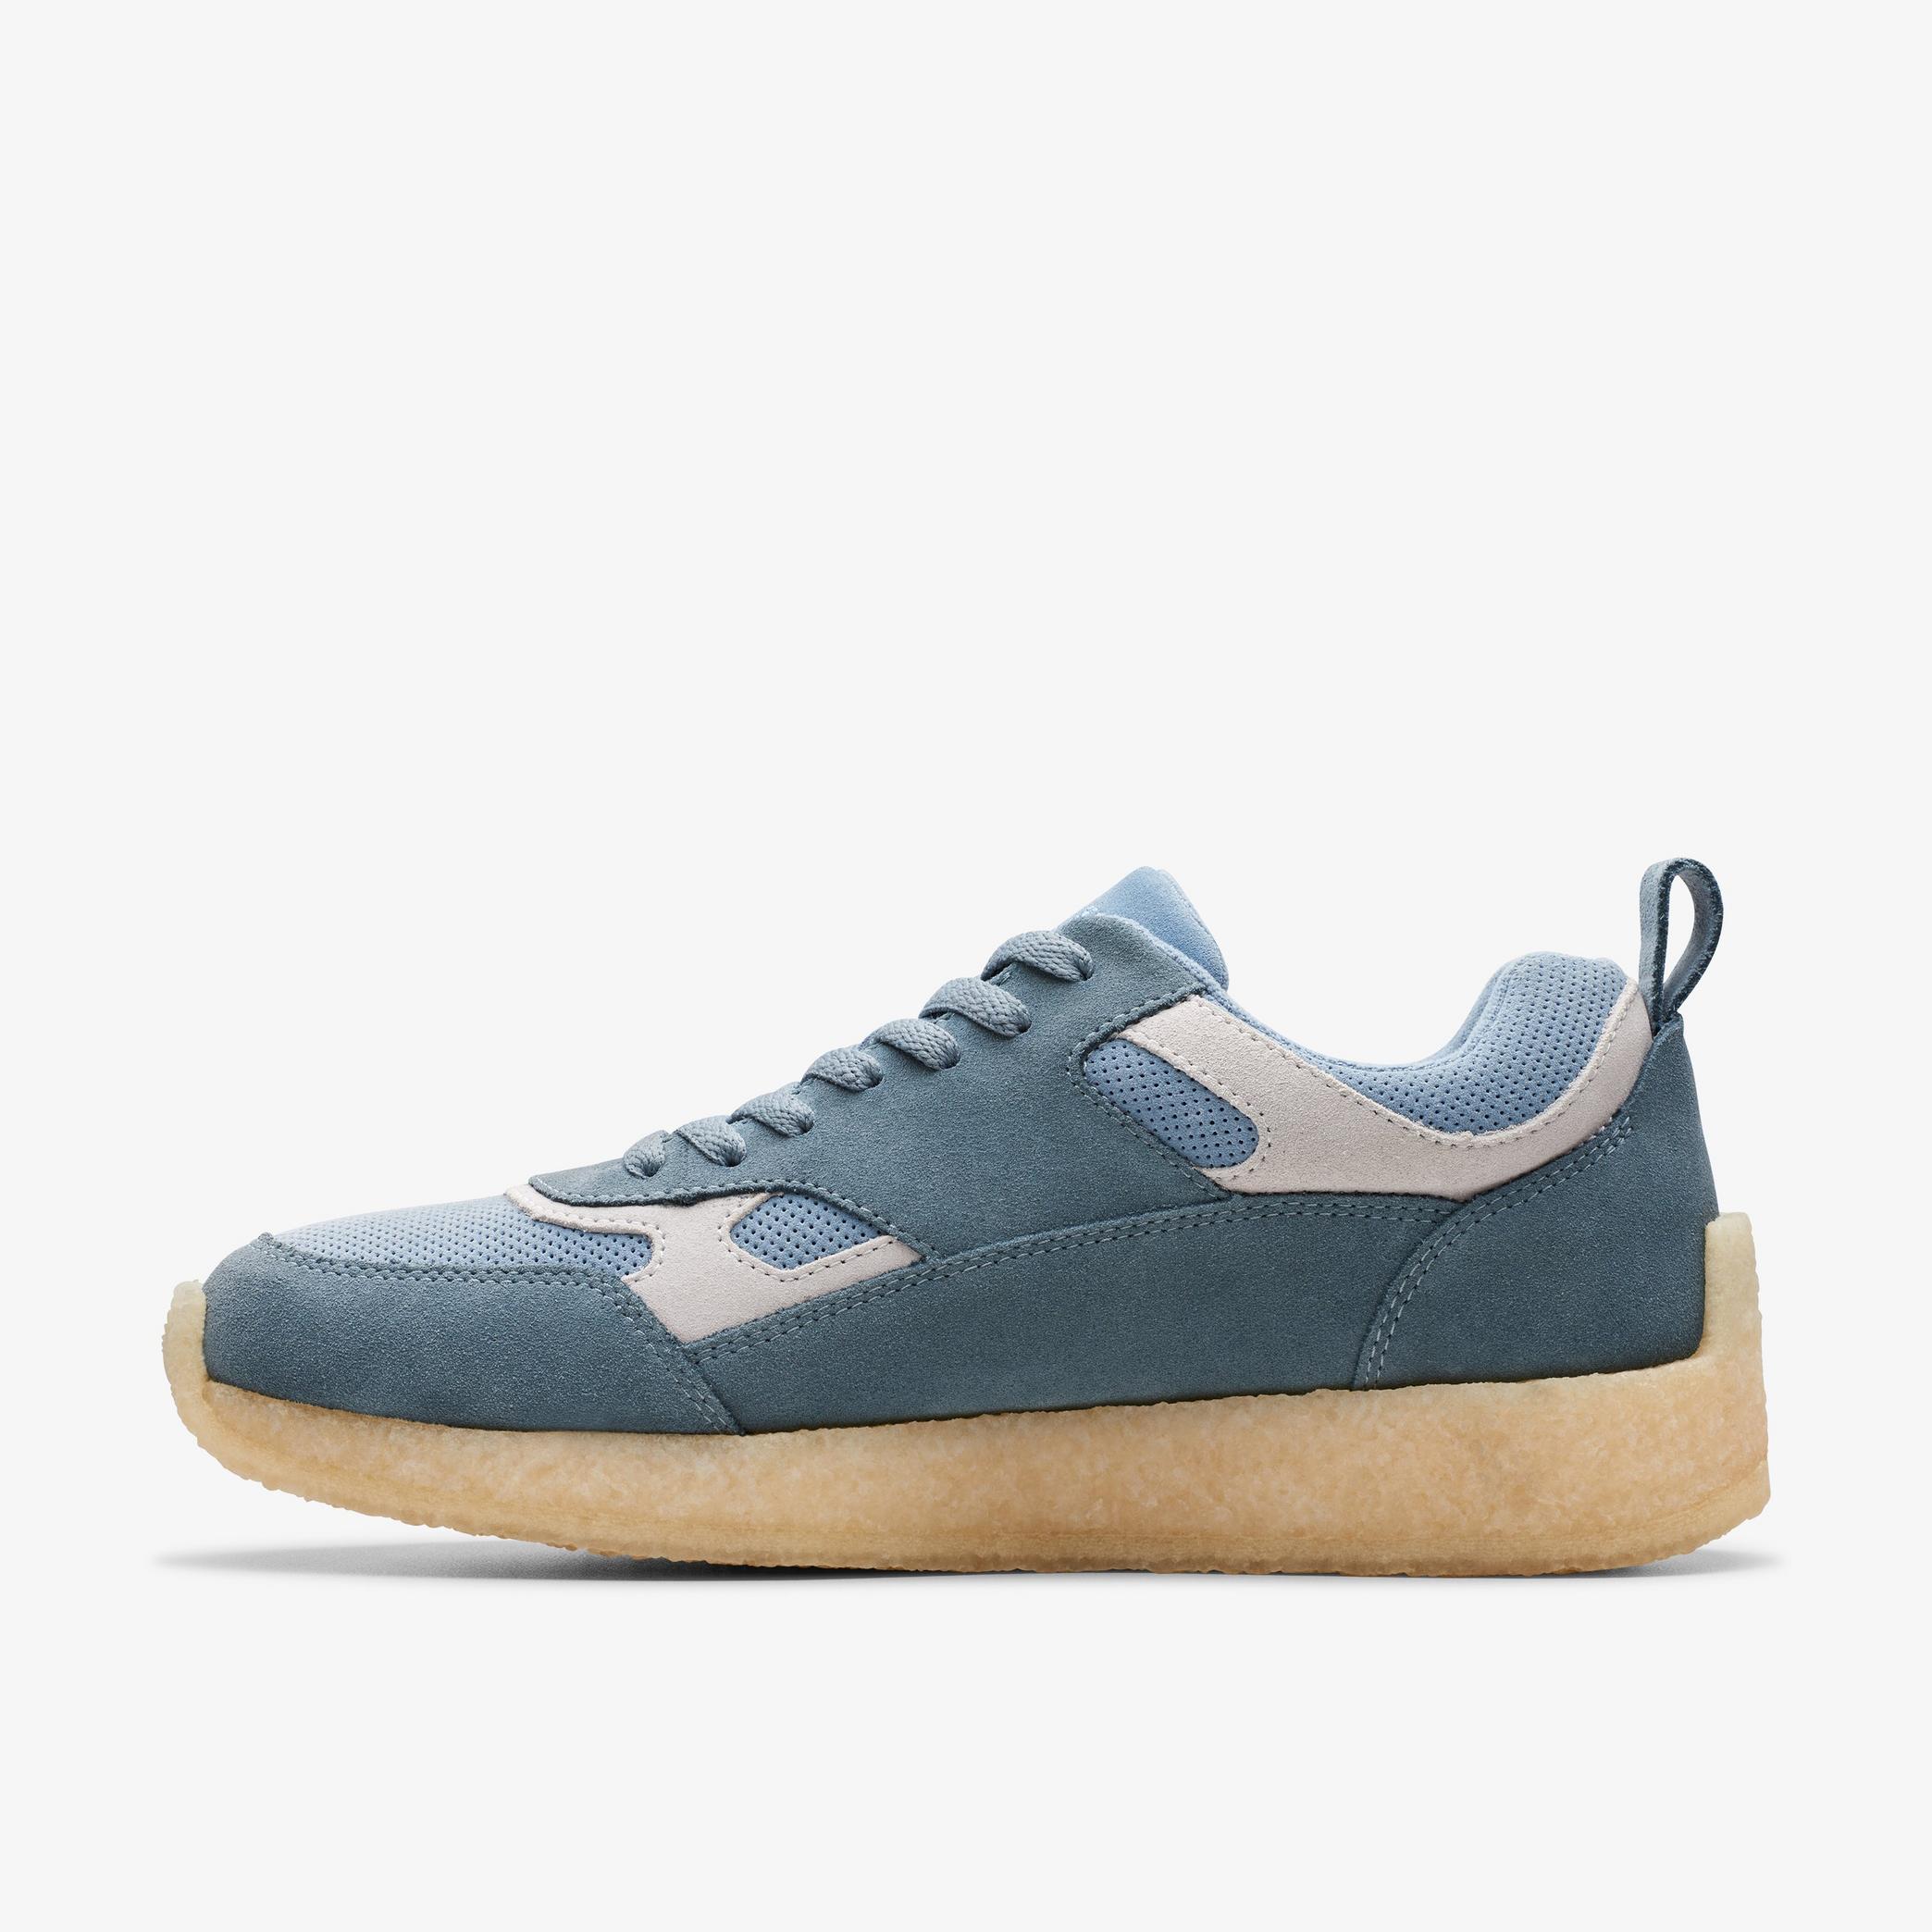 MENS, WOMENS, UNISEX 8th St Lockhill Blue Grey Combination Sneakers ...